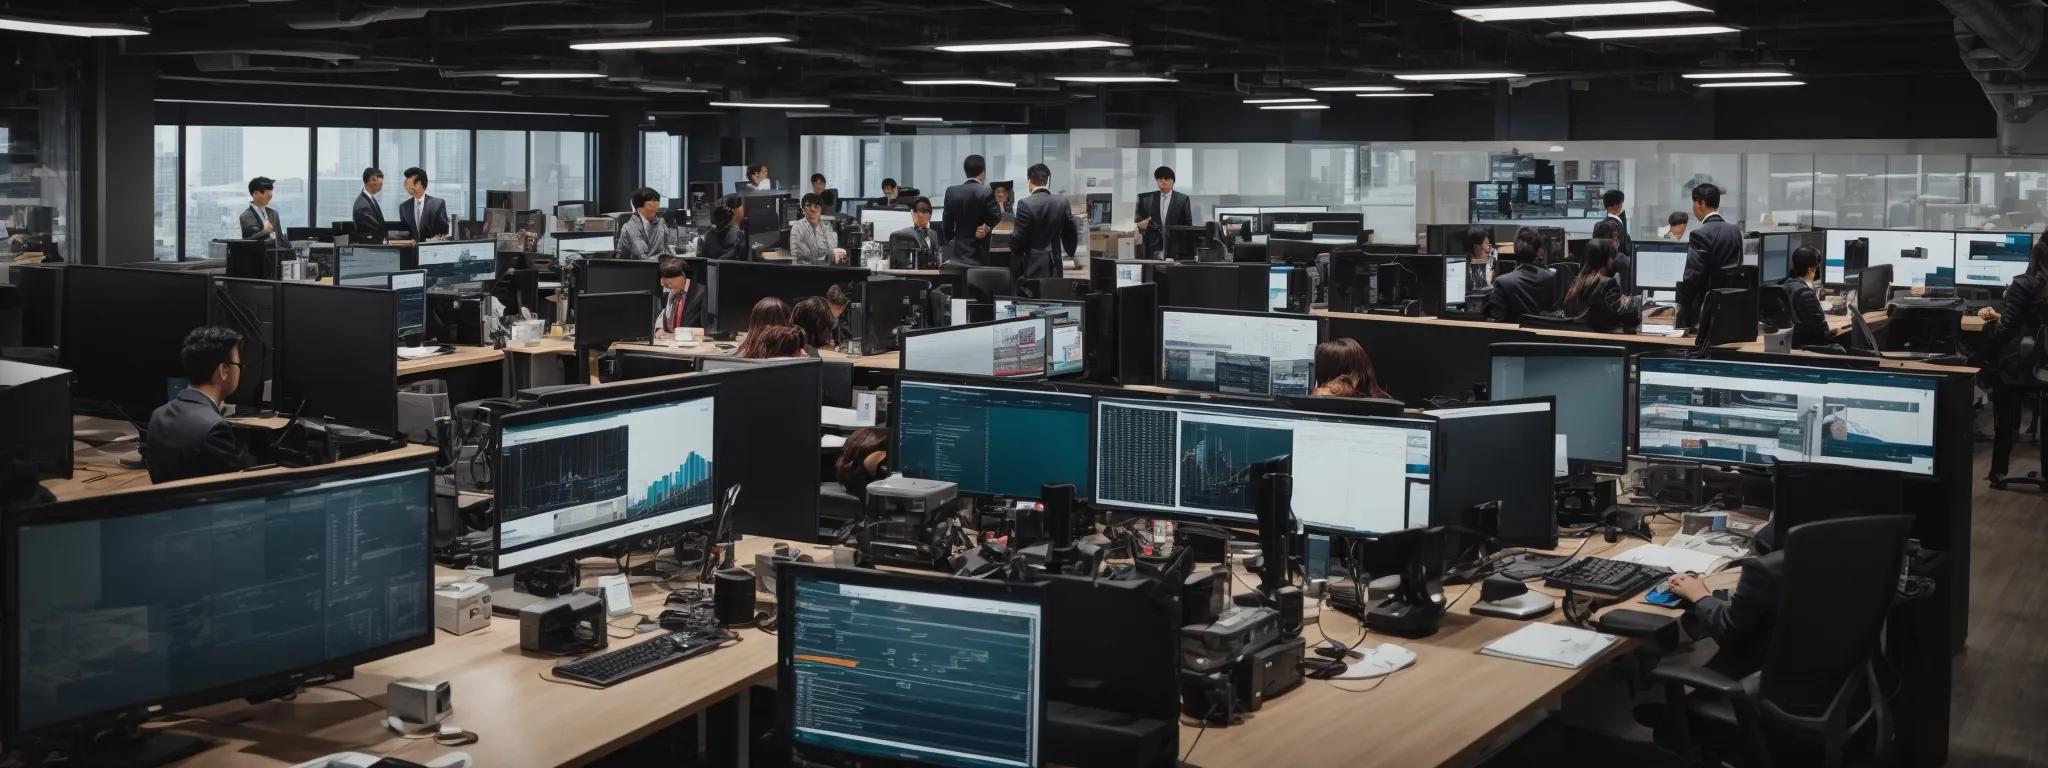 a panoramic view of a bustling digital marketing office with diverse professionals strategizing around computers displaying analytics graphs.